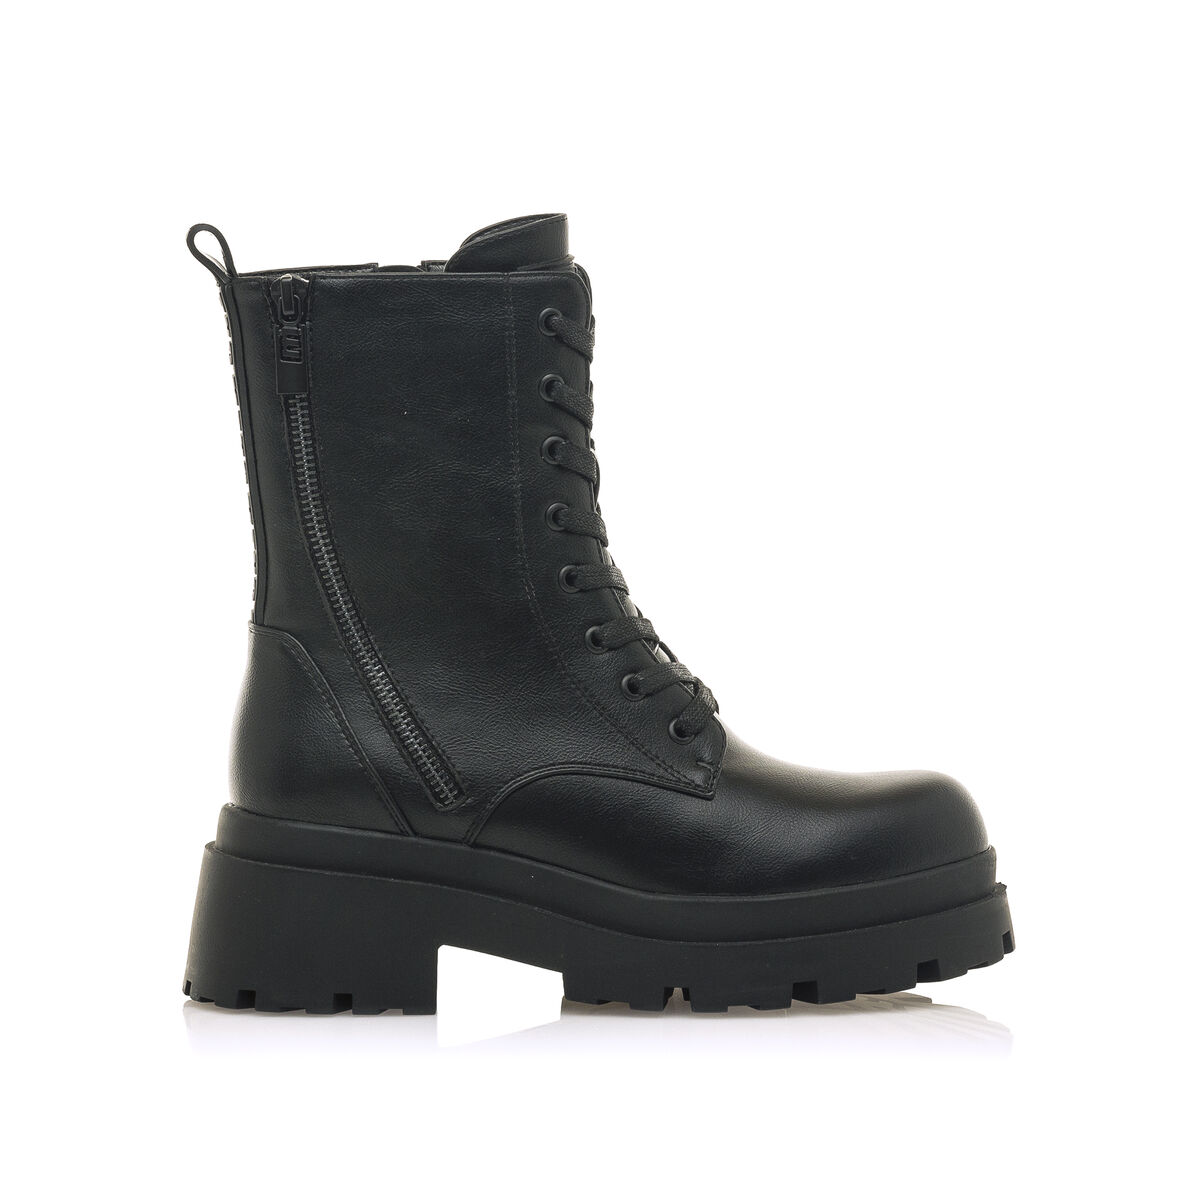 MTNG BLACK MILITARY ANKLE BOOTS